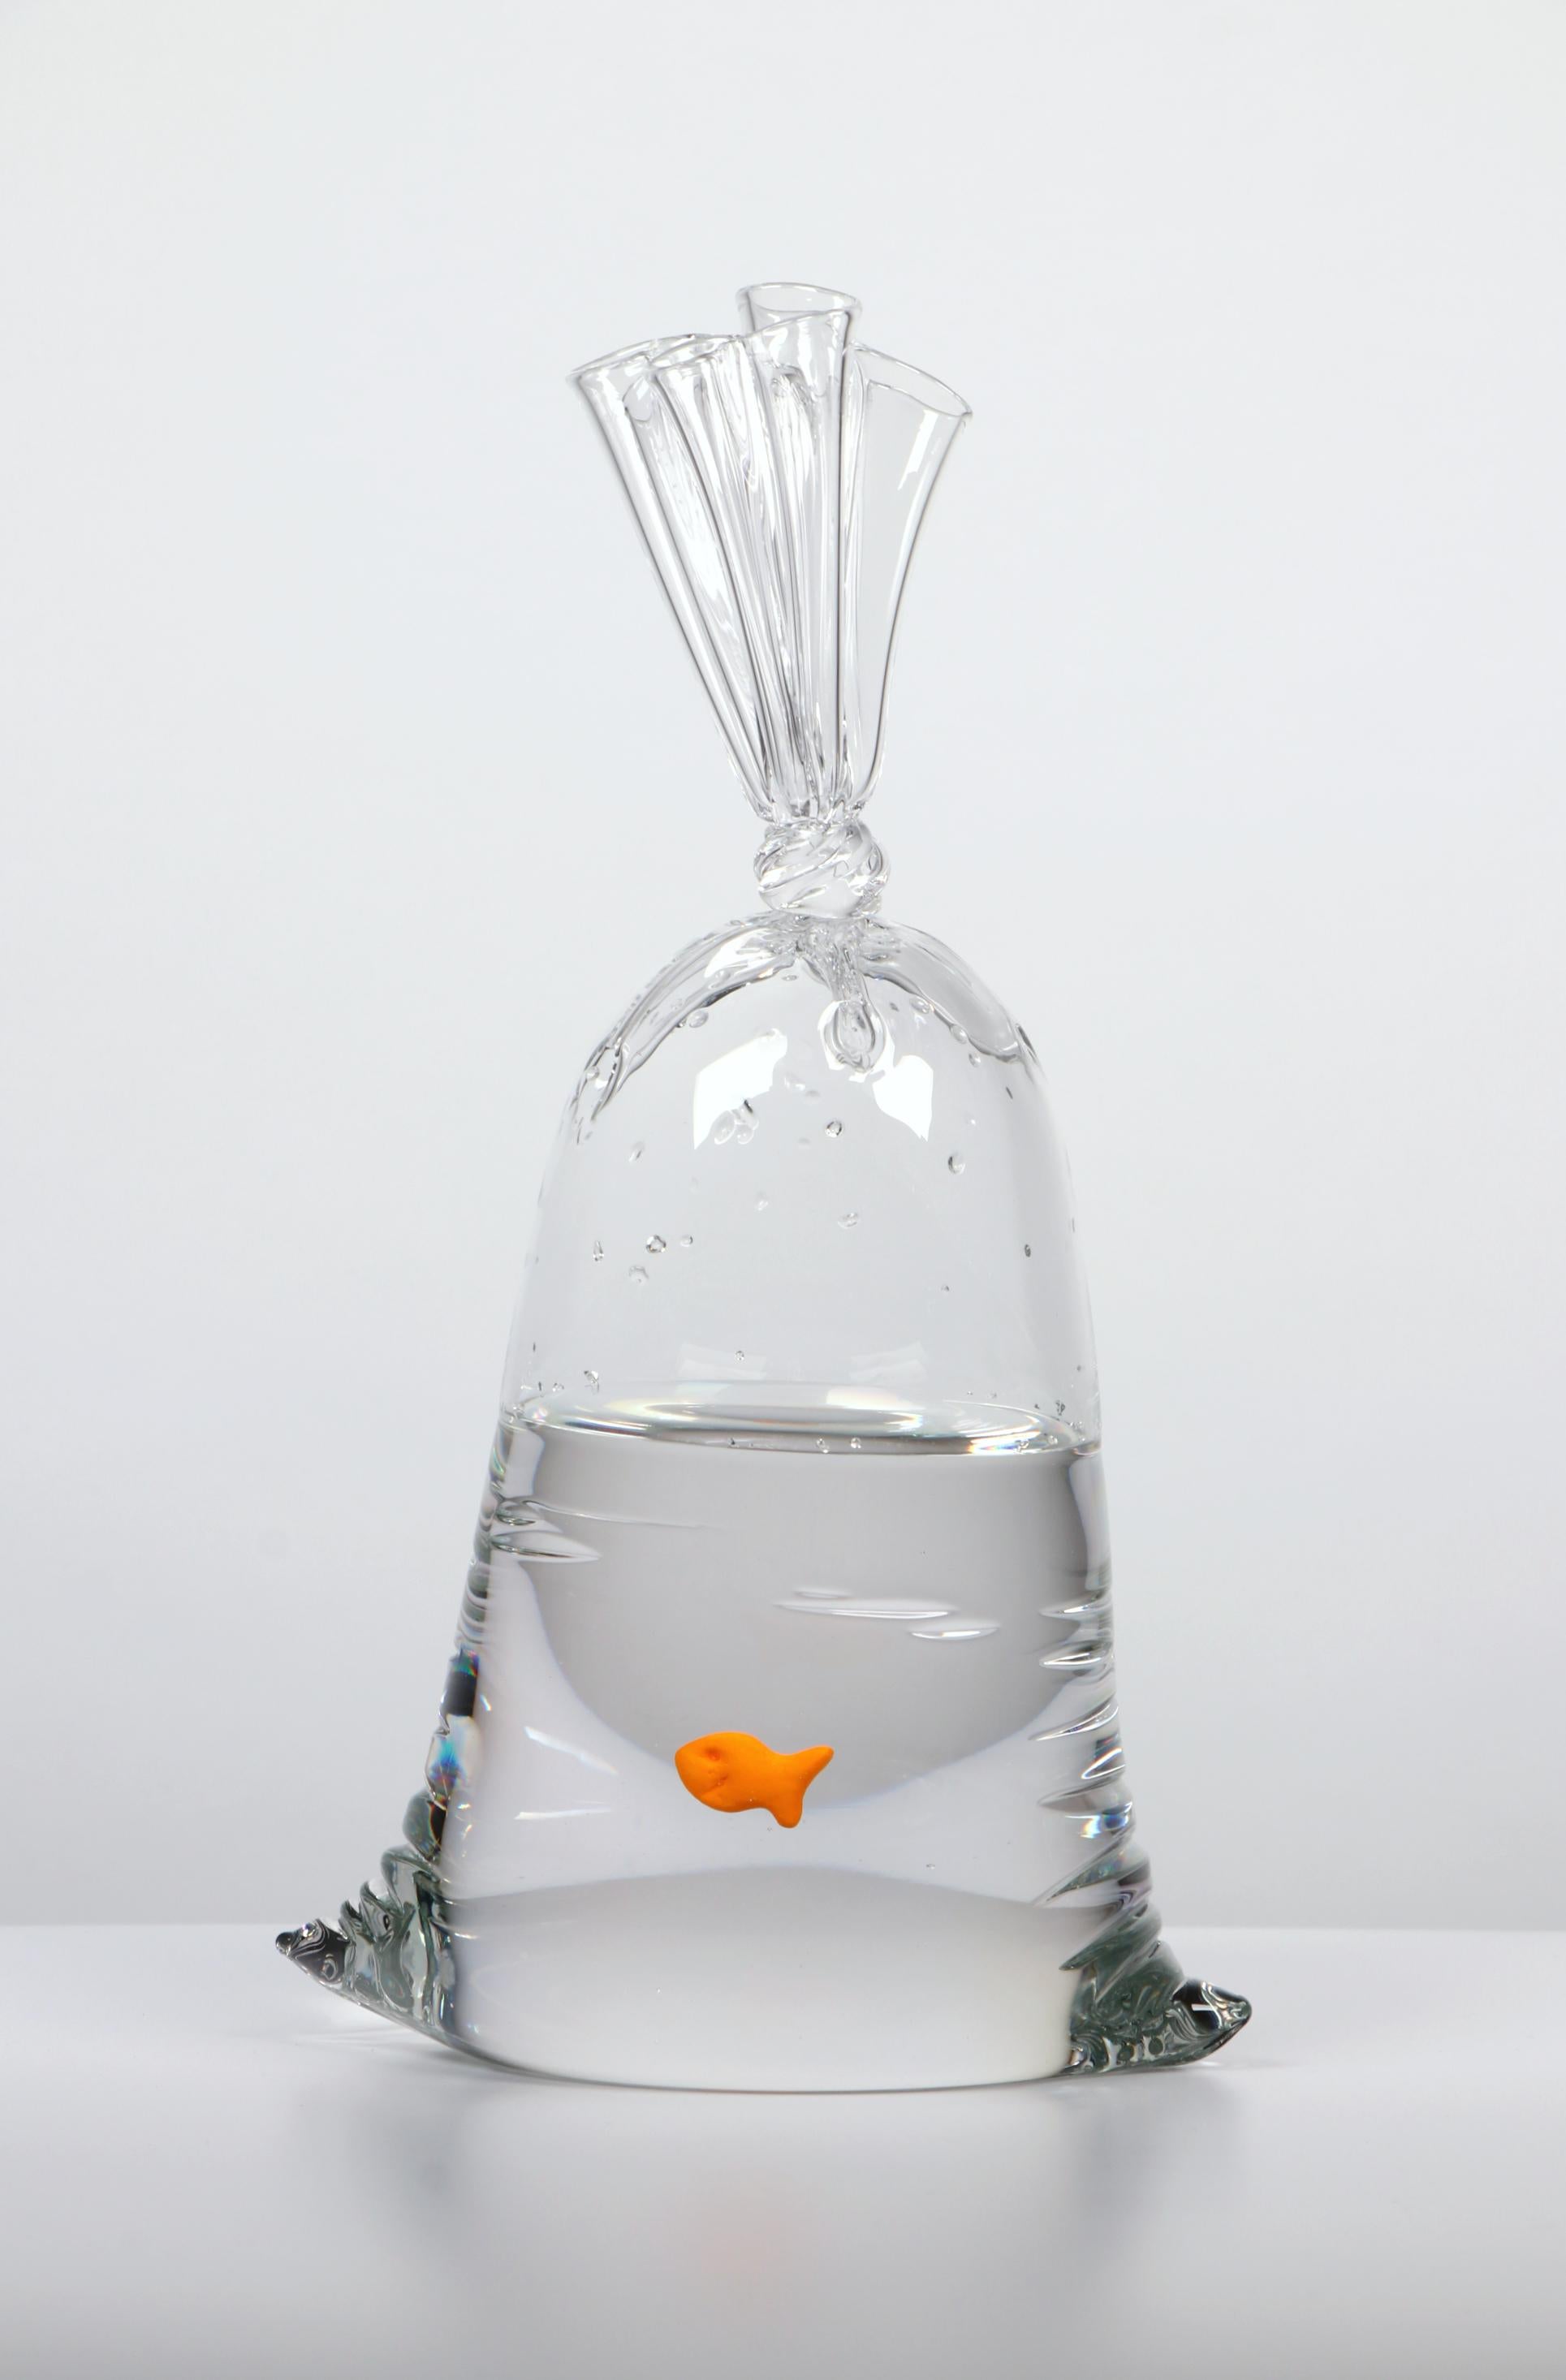 A hyper-realistic glass sculptor, Dylan's playful creations deceive the eye with their lifelike appearance. Whether mimicking water balloons or plastic bags filled with water housing a goldfish cracker, each piece is meticulously designed and